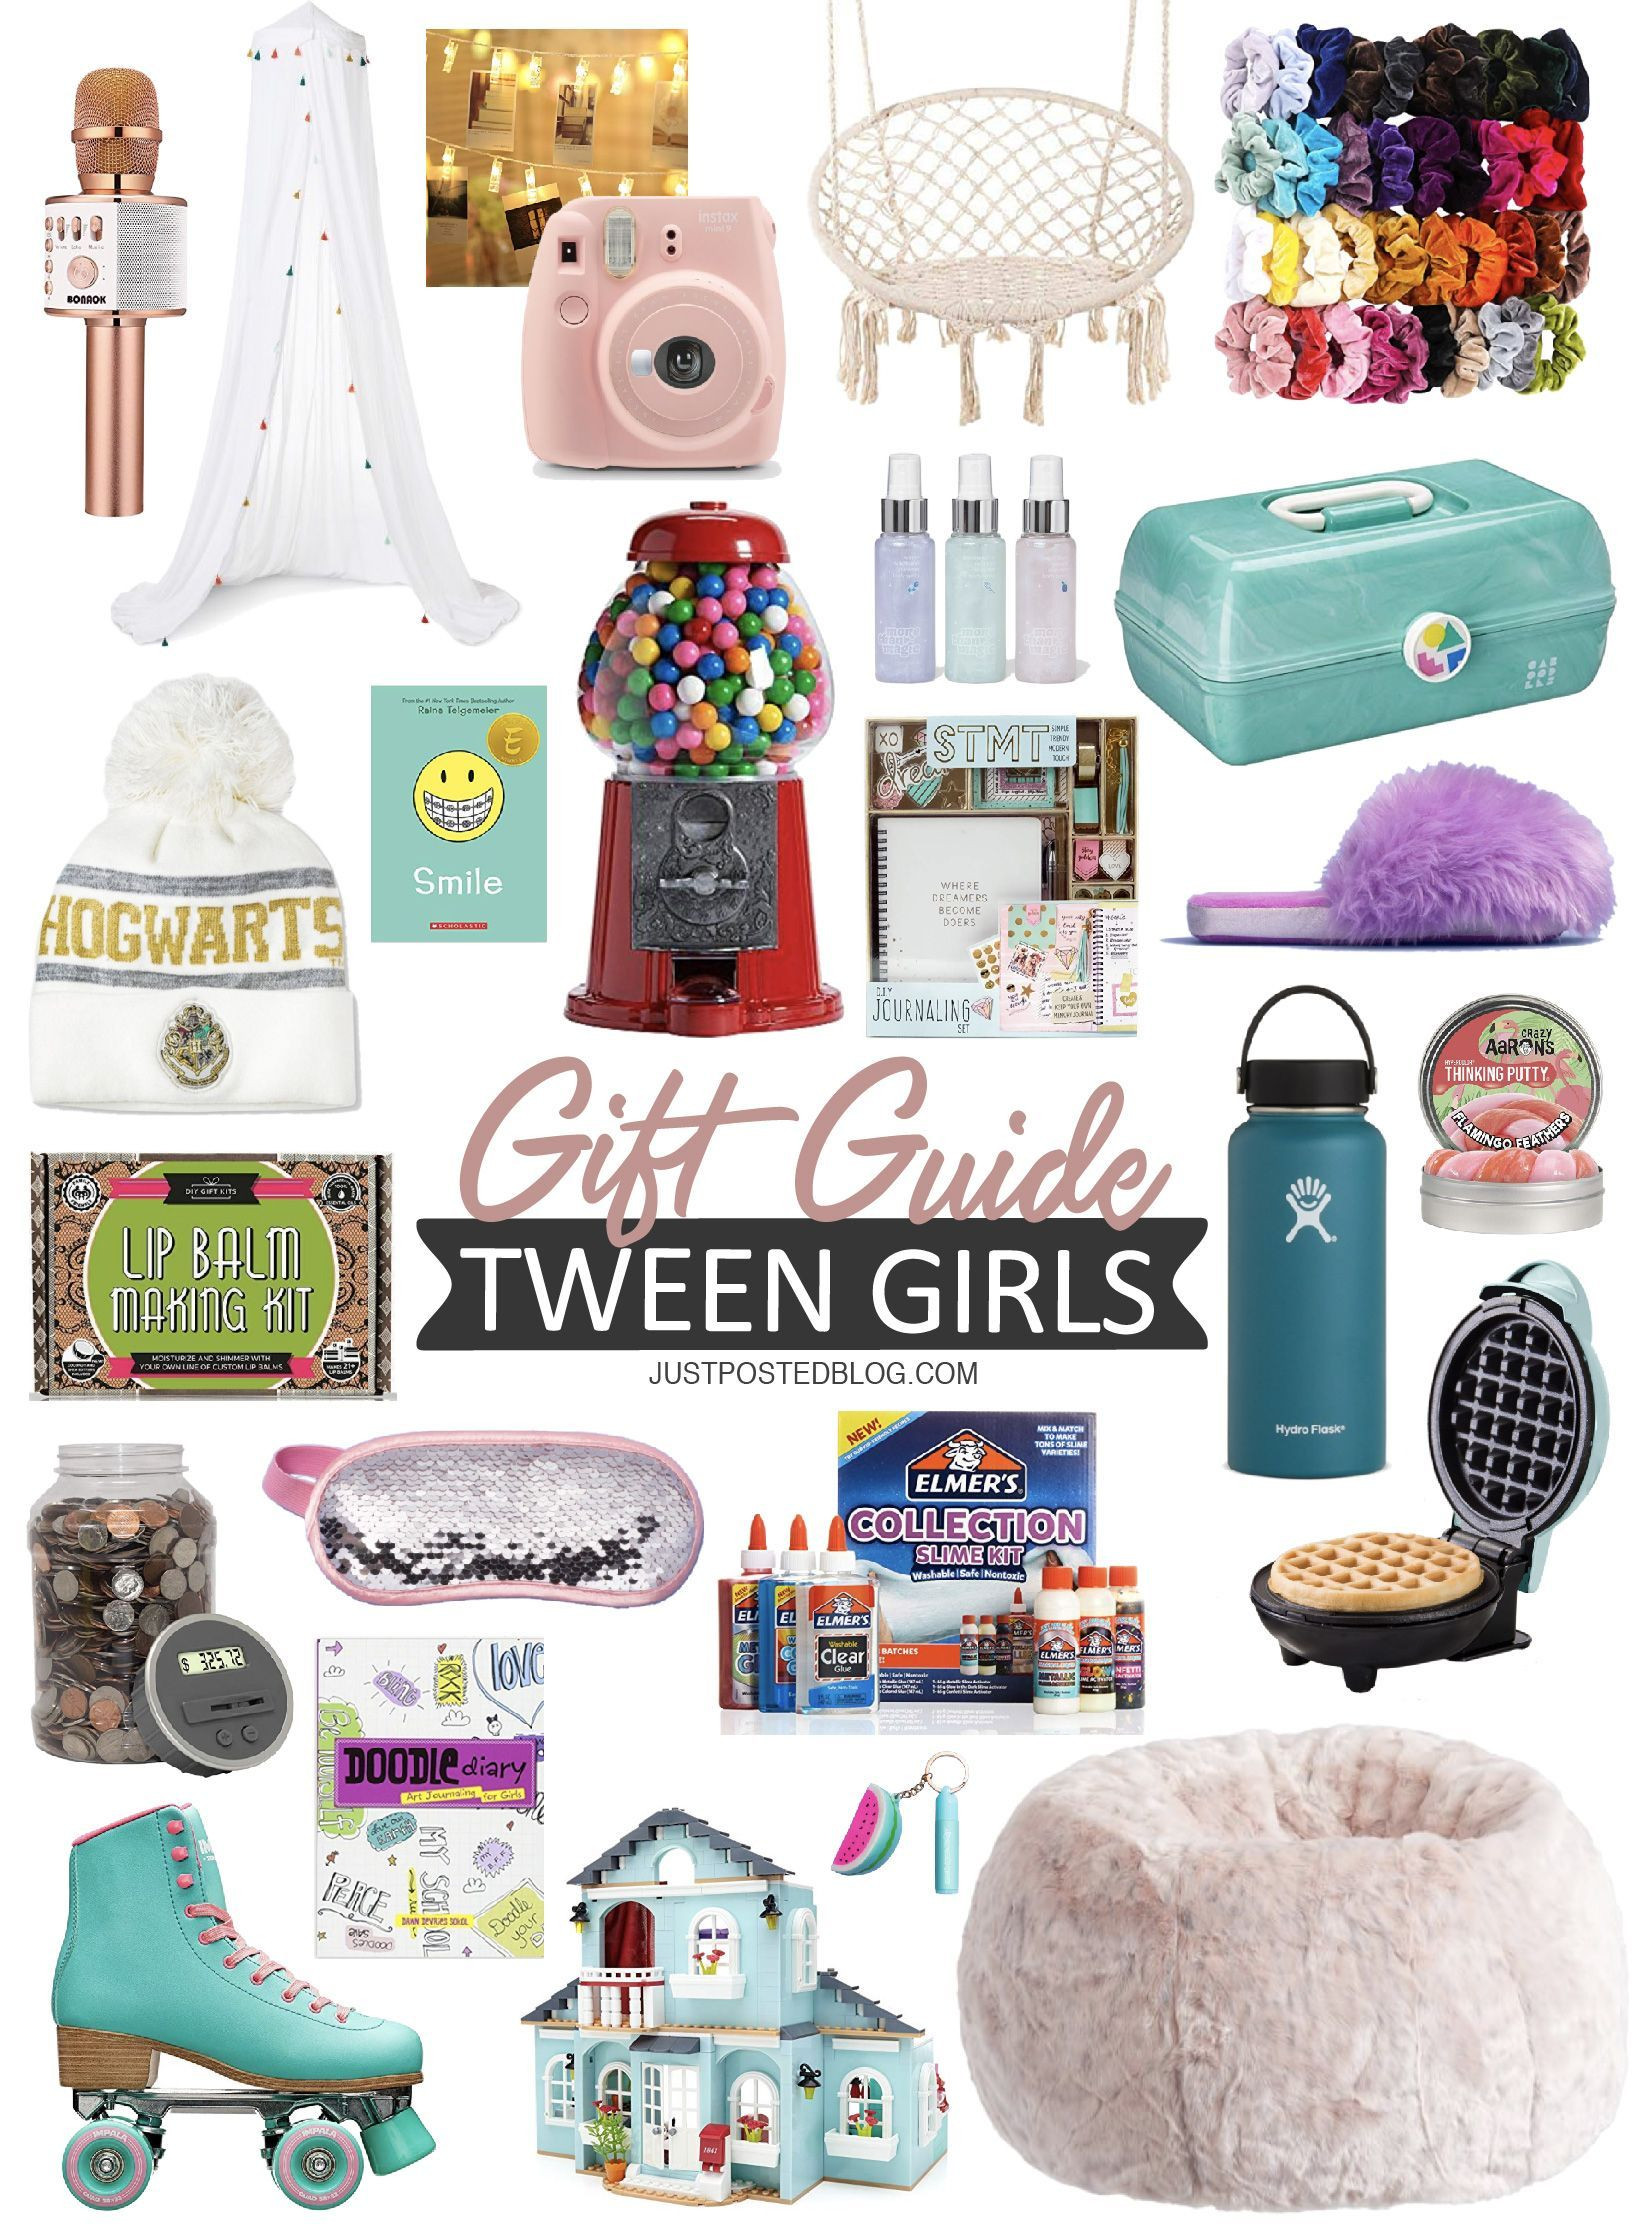 Good Gift Ideas For Girls
 Pin on Stuff to Buy